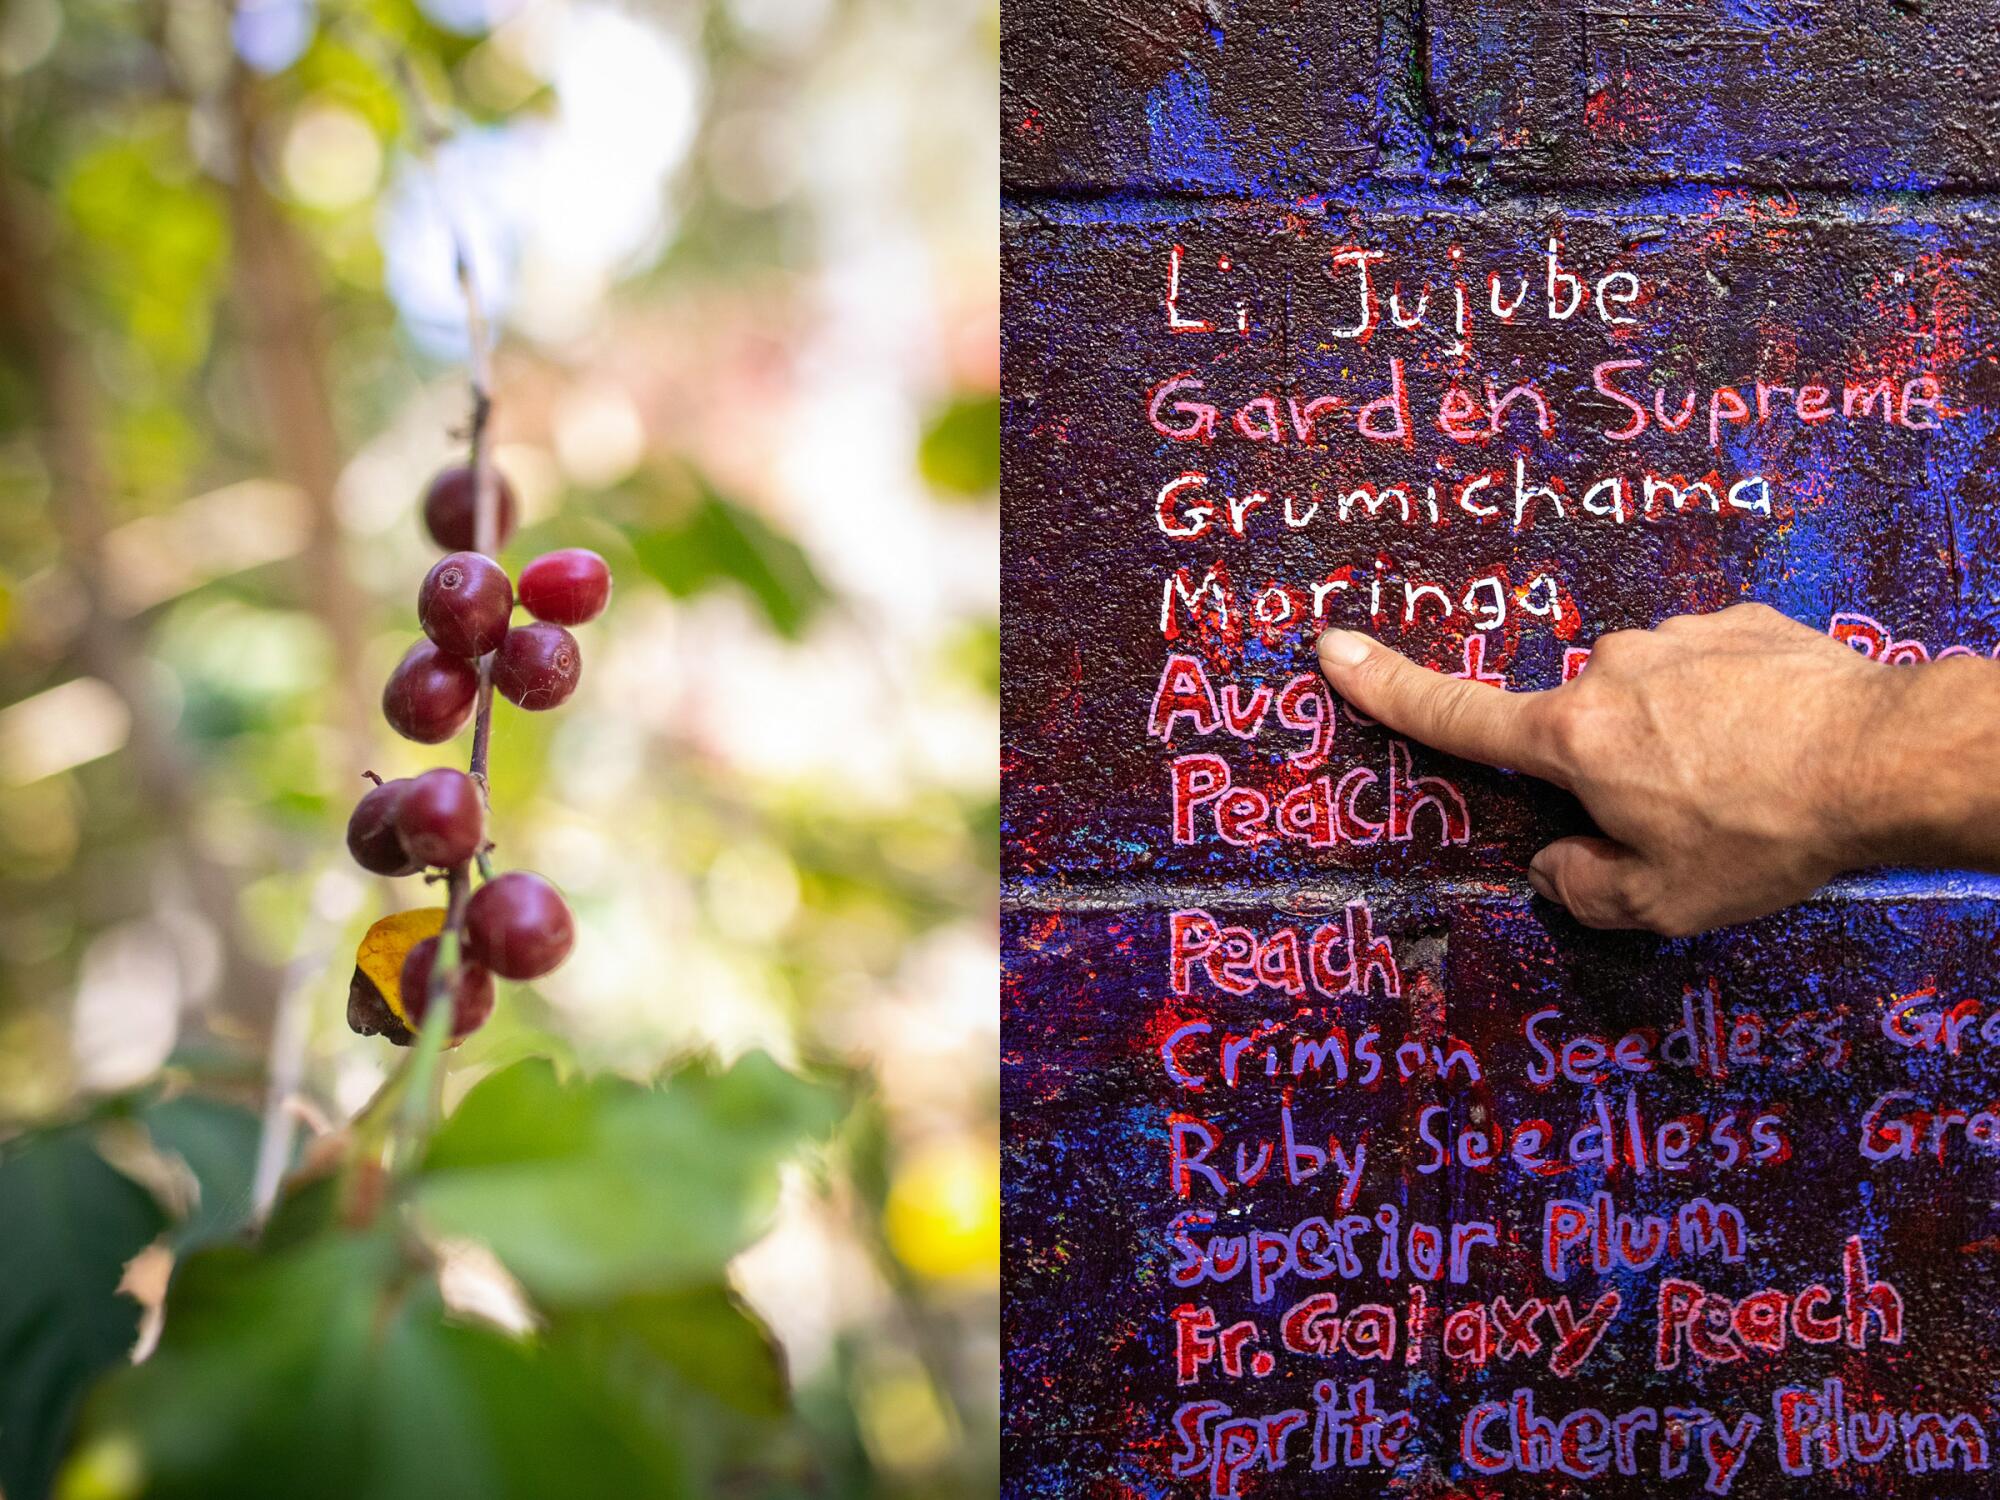 Two images, side by side, of coffee growing on a branch and a hand pointing to a hand-painted list of fruit trees.